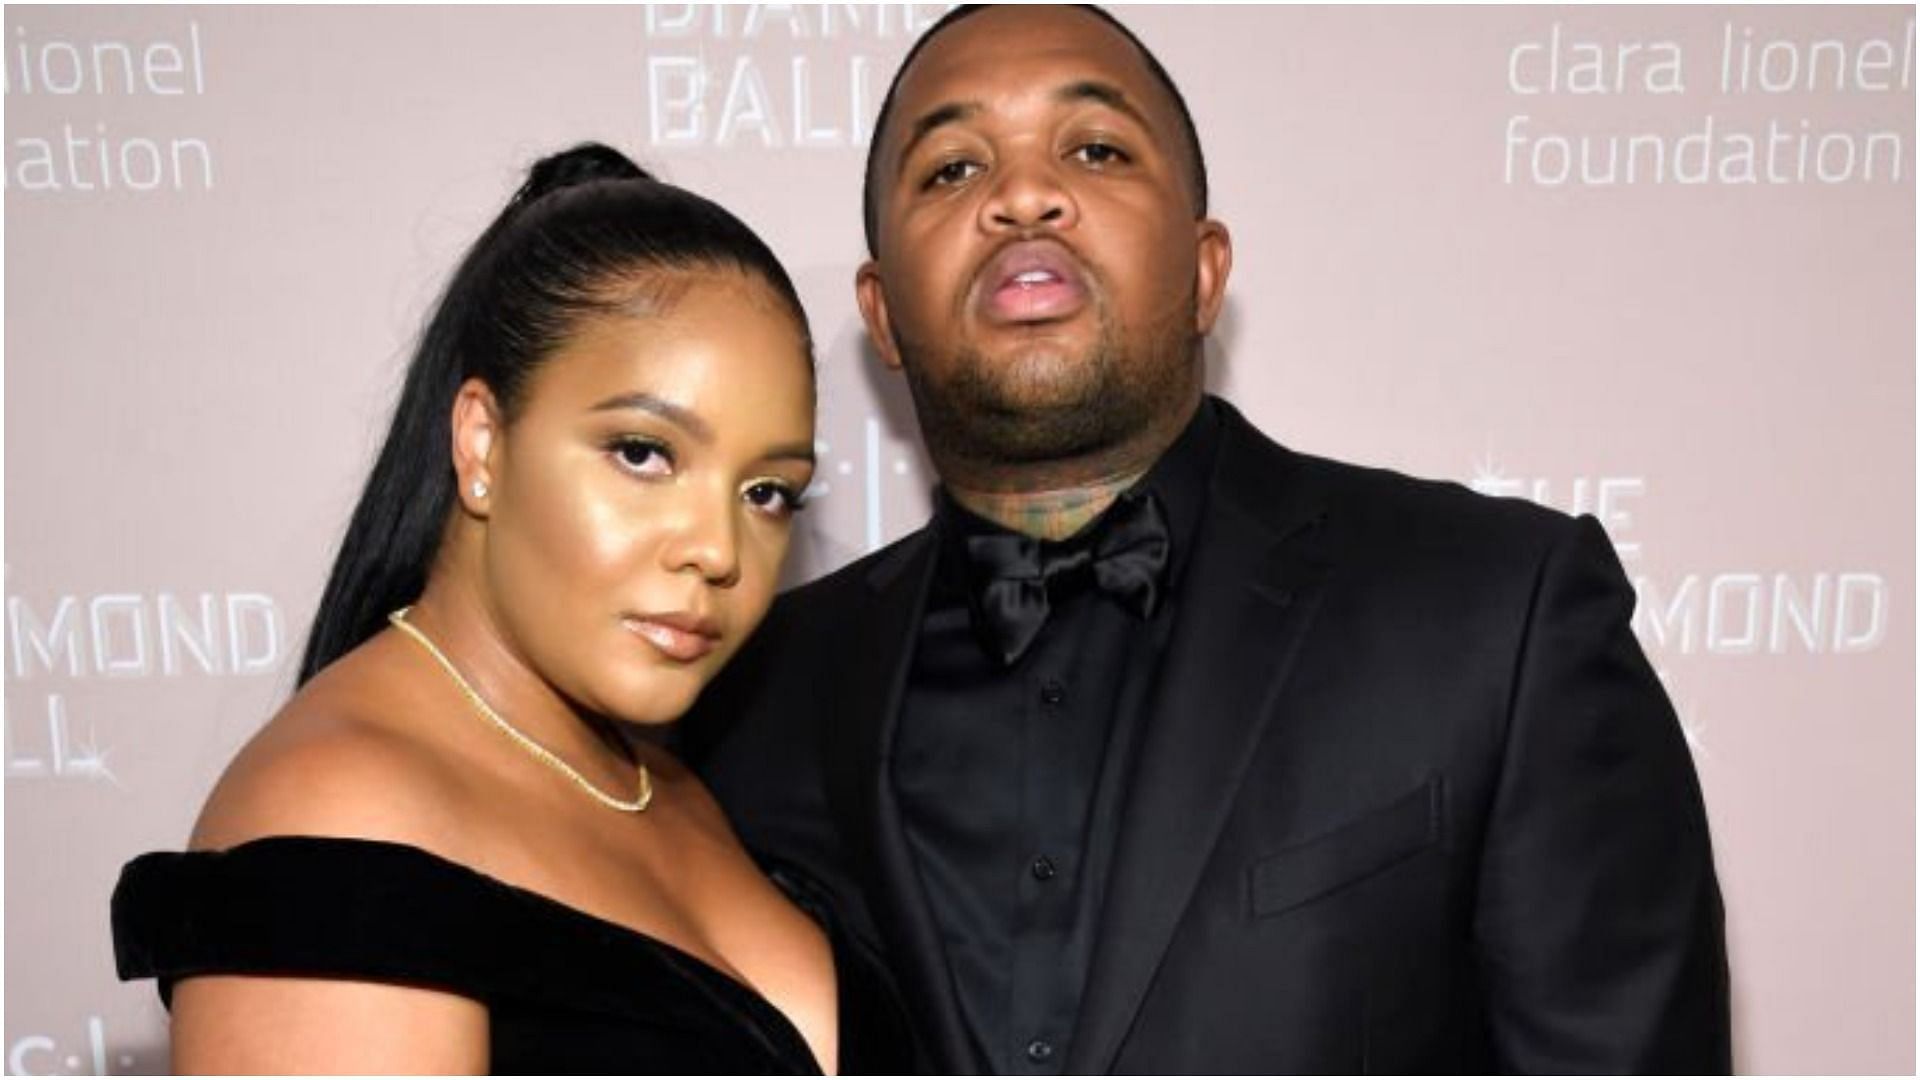 DJ Mustard has filed for divorce from Chanel Thierry (Image via Kevin Mazur/Getty Images)